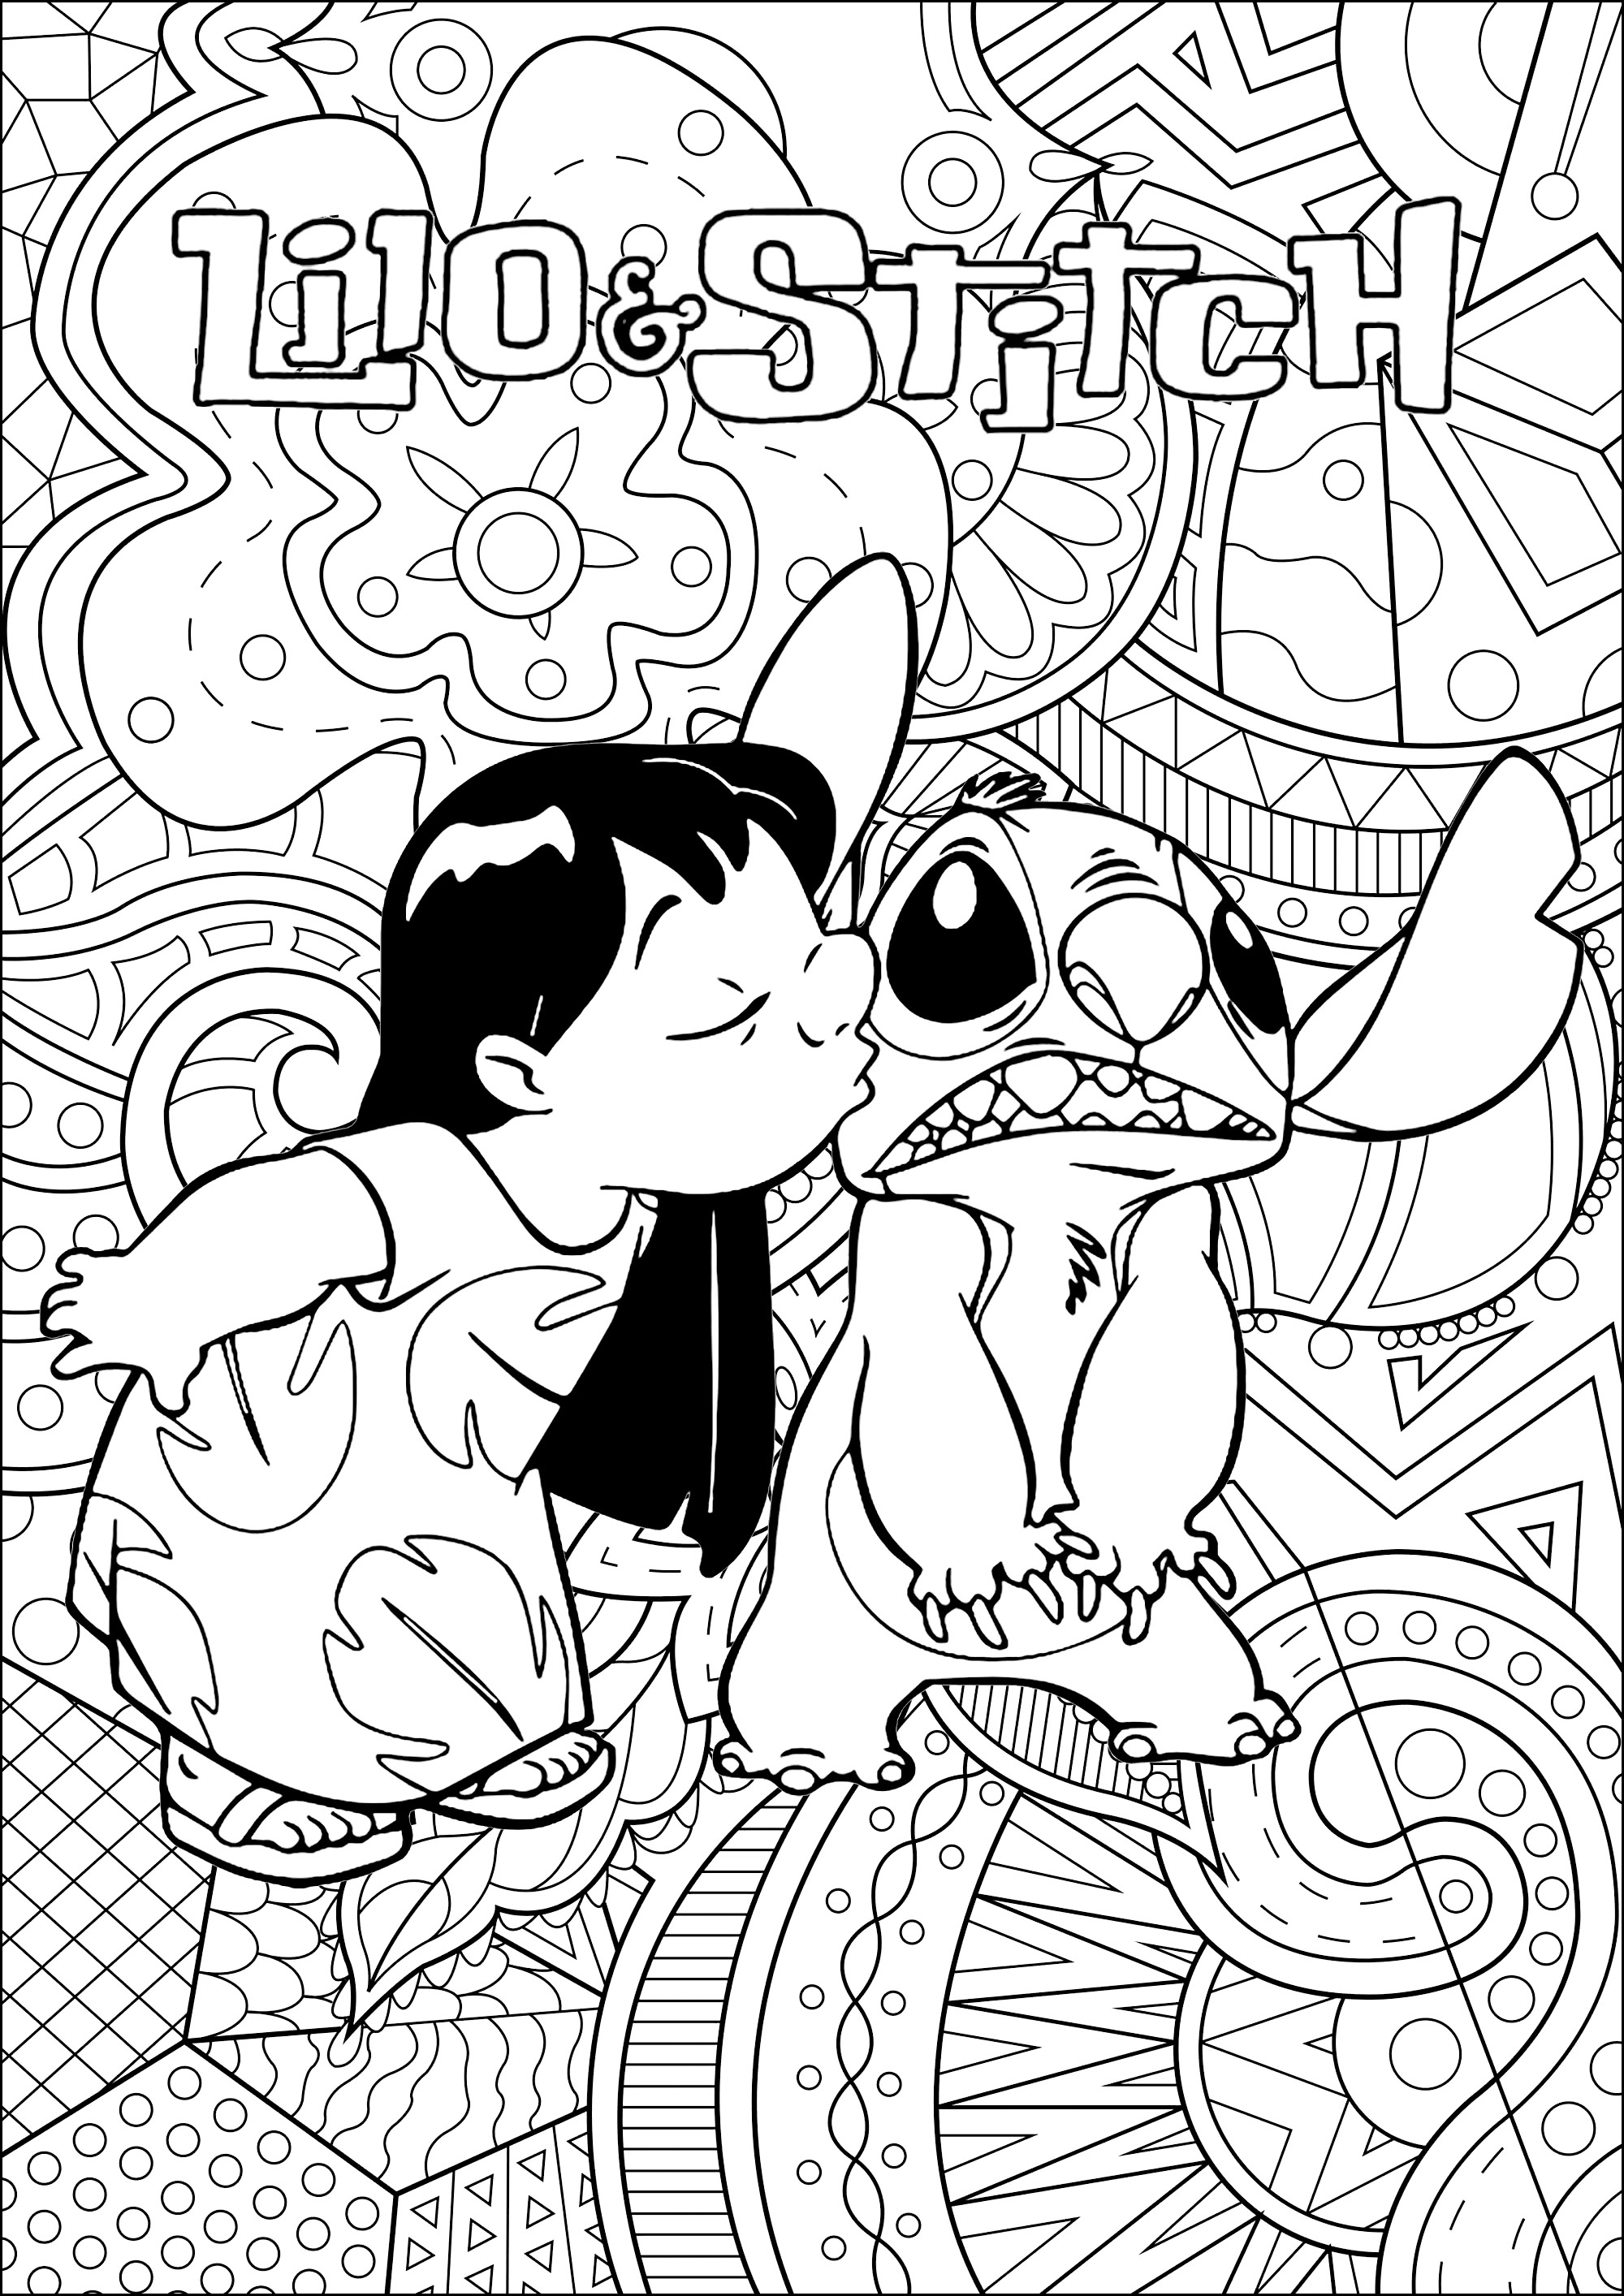 https://www.justcolor.net/wp-content/uploads/sites/1/nggallery/back-to-childhood/coloring-lilo-stitch-disney-complex.jpg